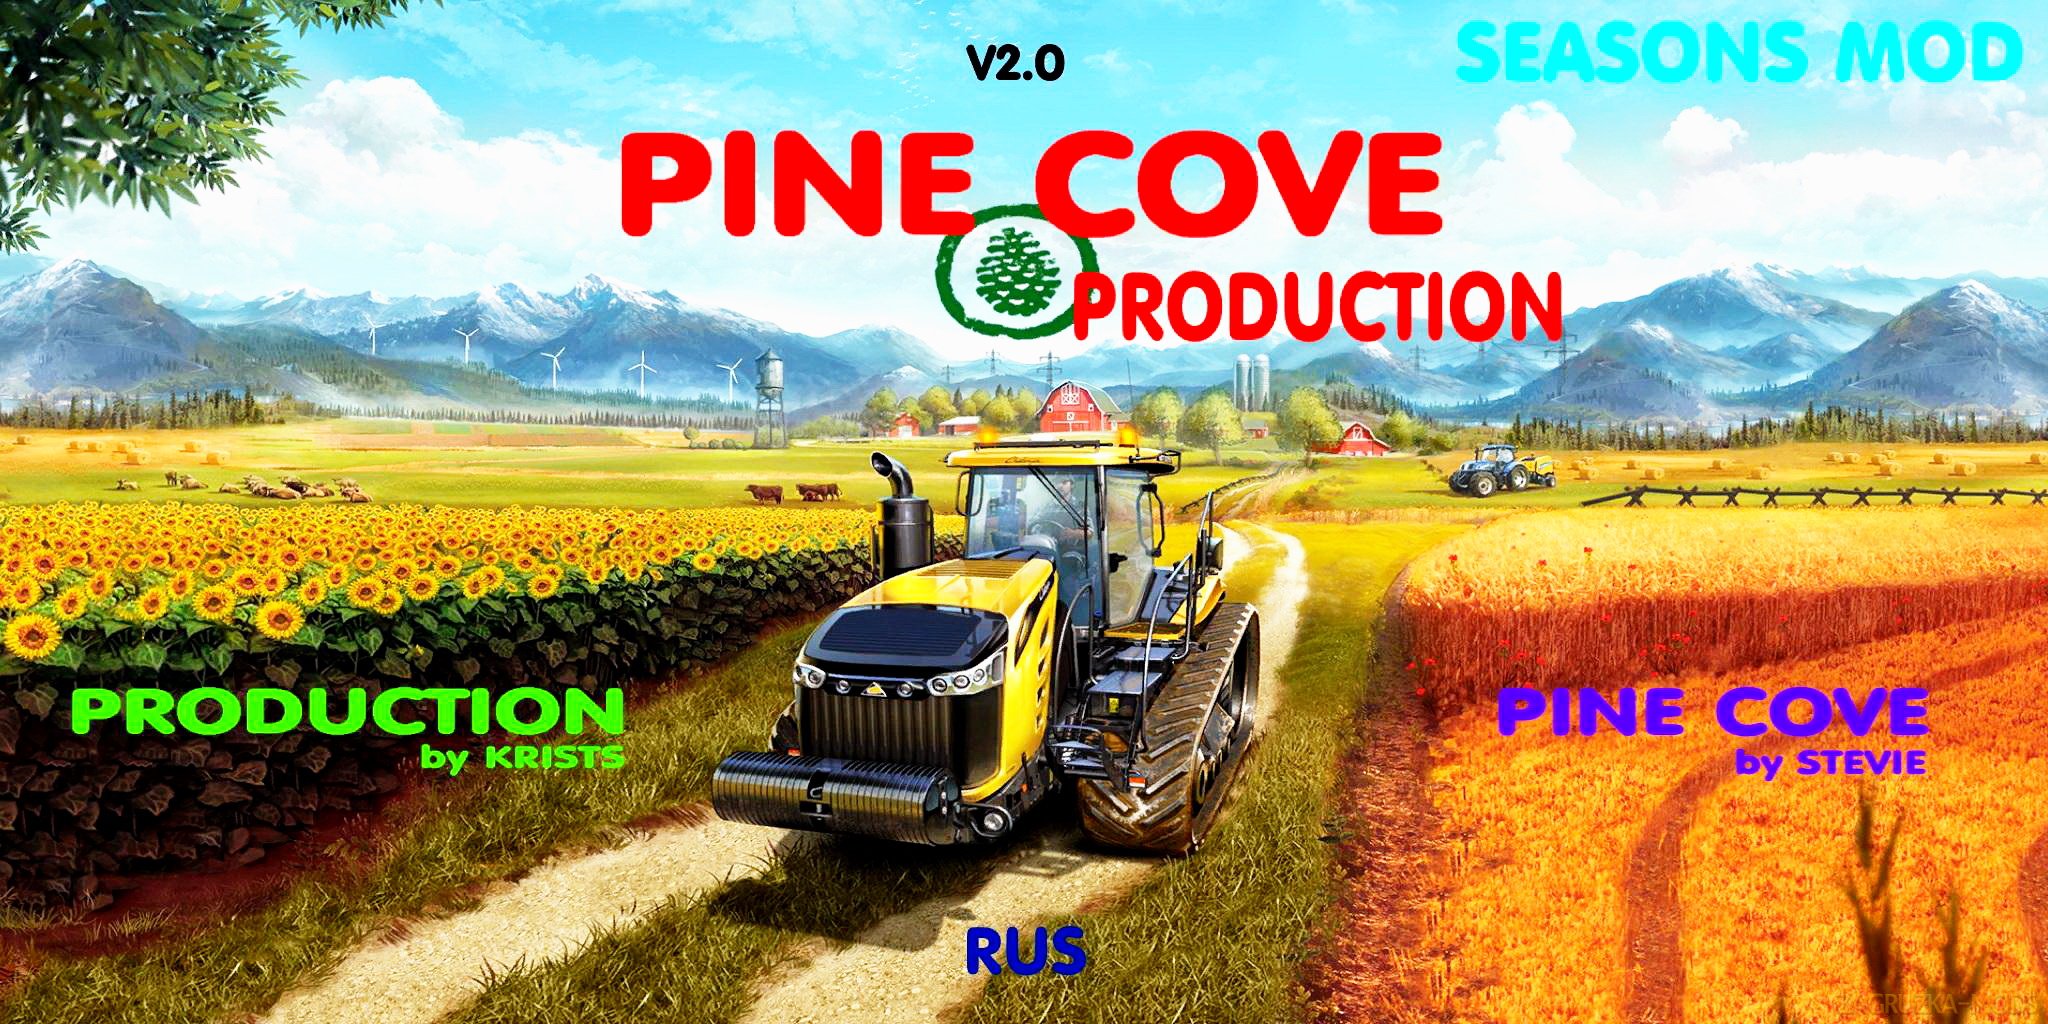 Pine Cove Production RUS v2.0 for FS 17